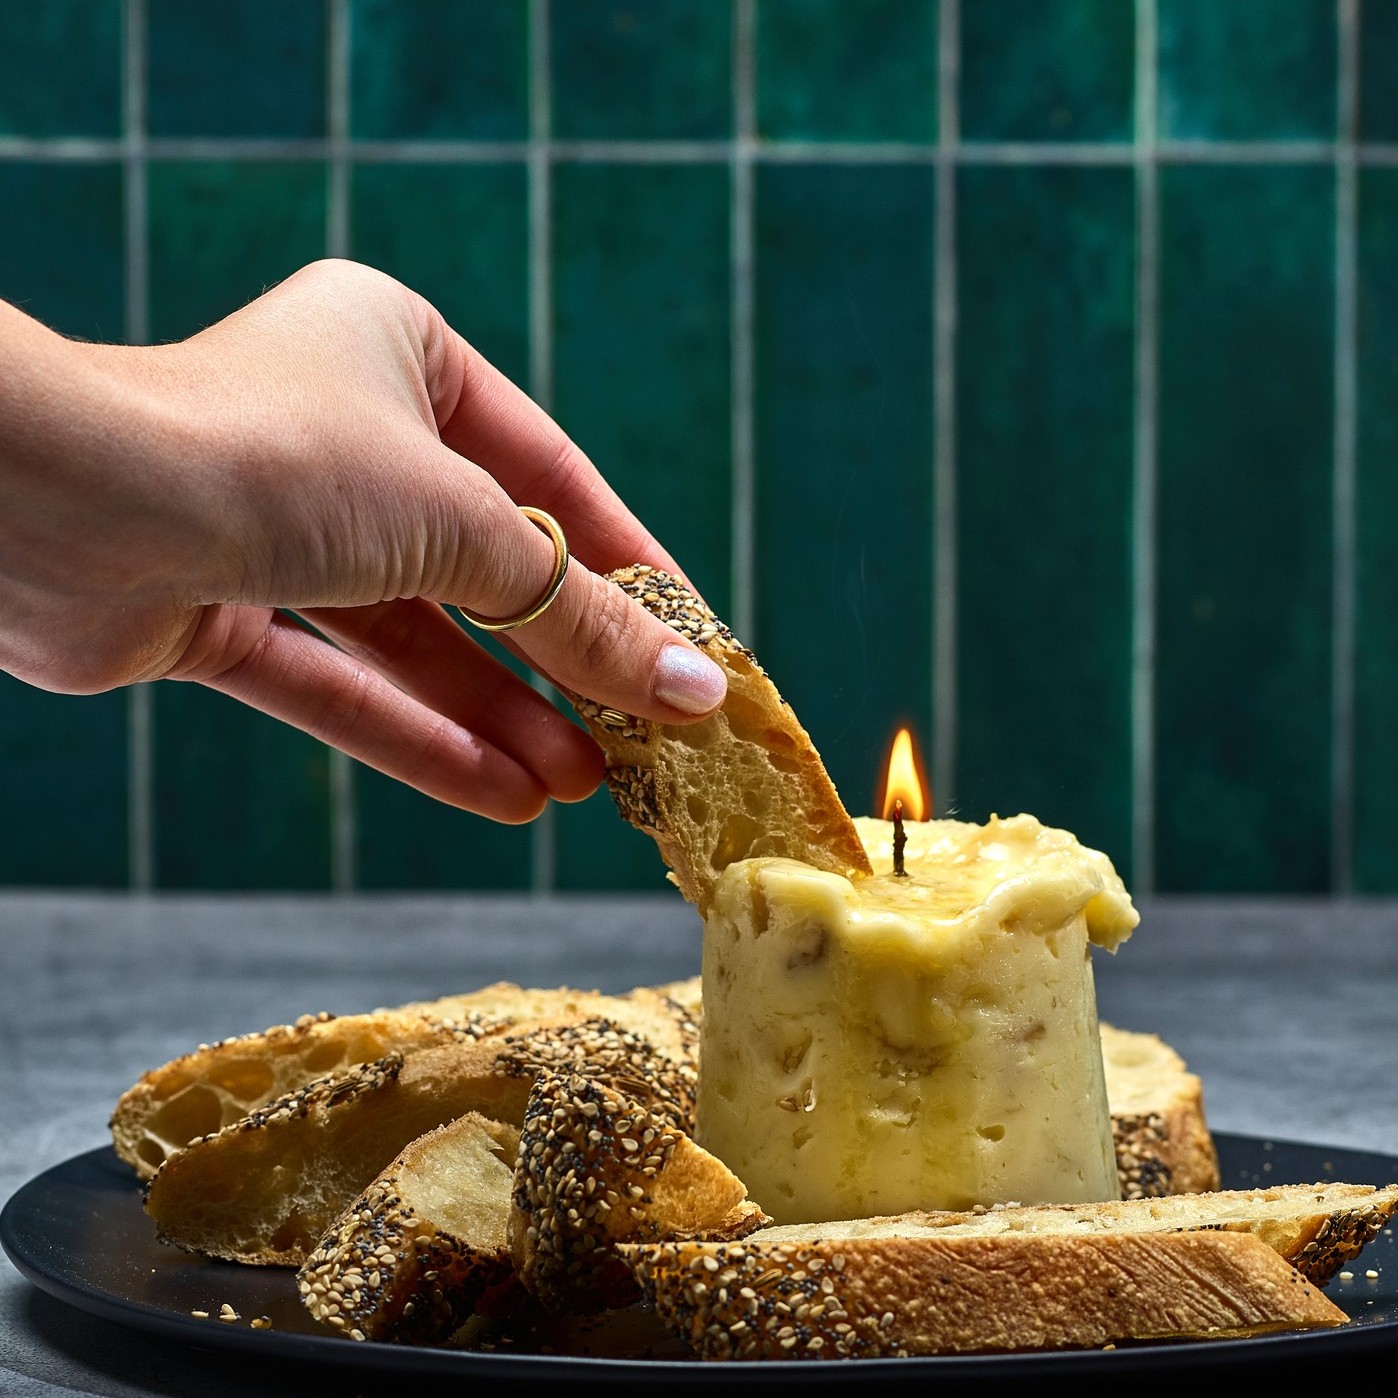 Realistic Food Candles Look Good Enough to Eat